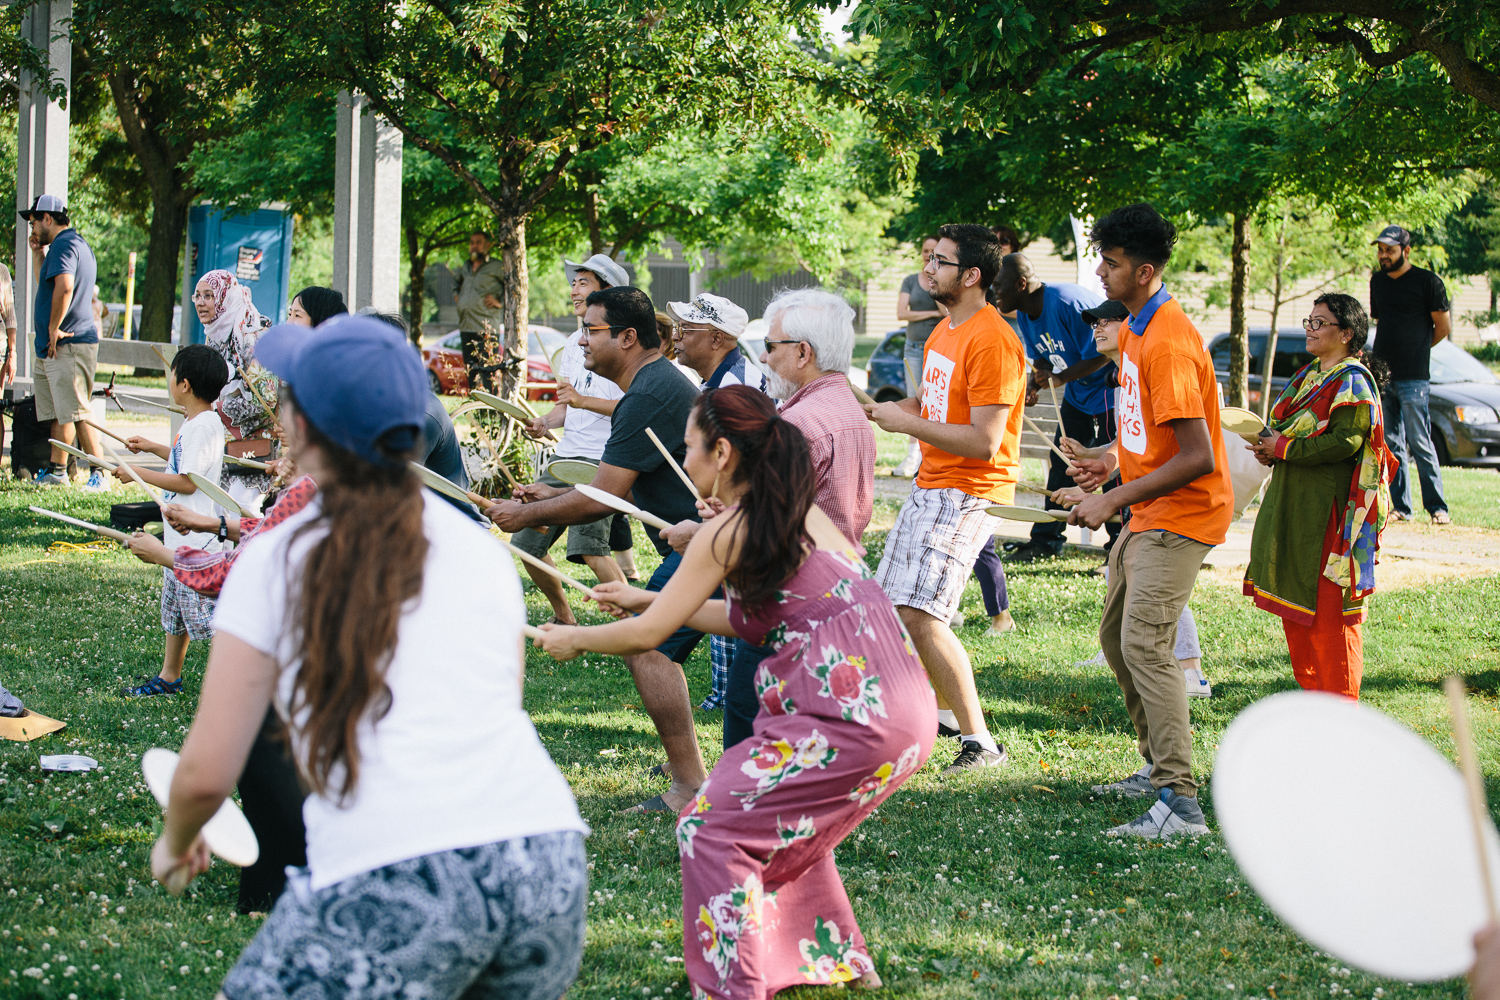 A group of audience members stand and play hand drums as they participate in a workshop on the grass.